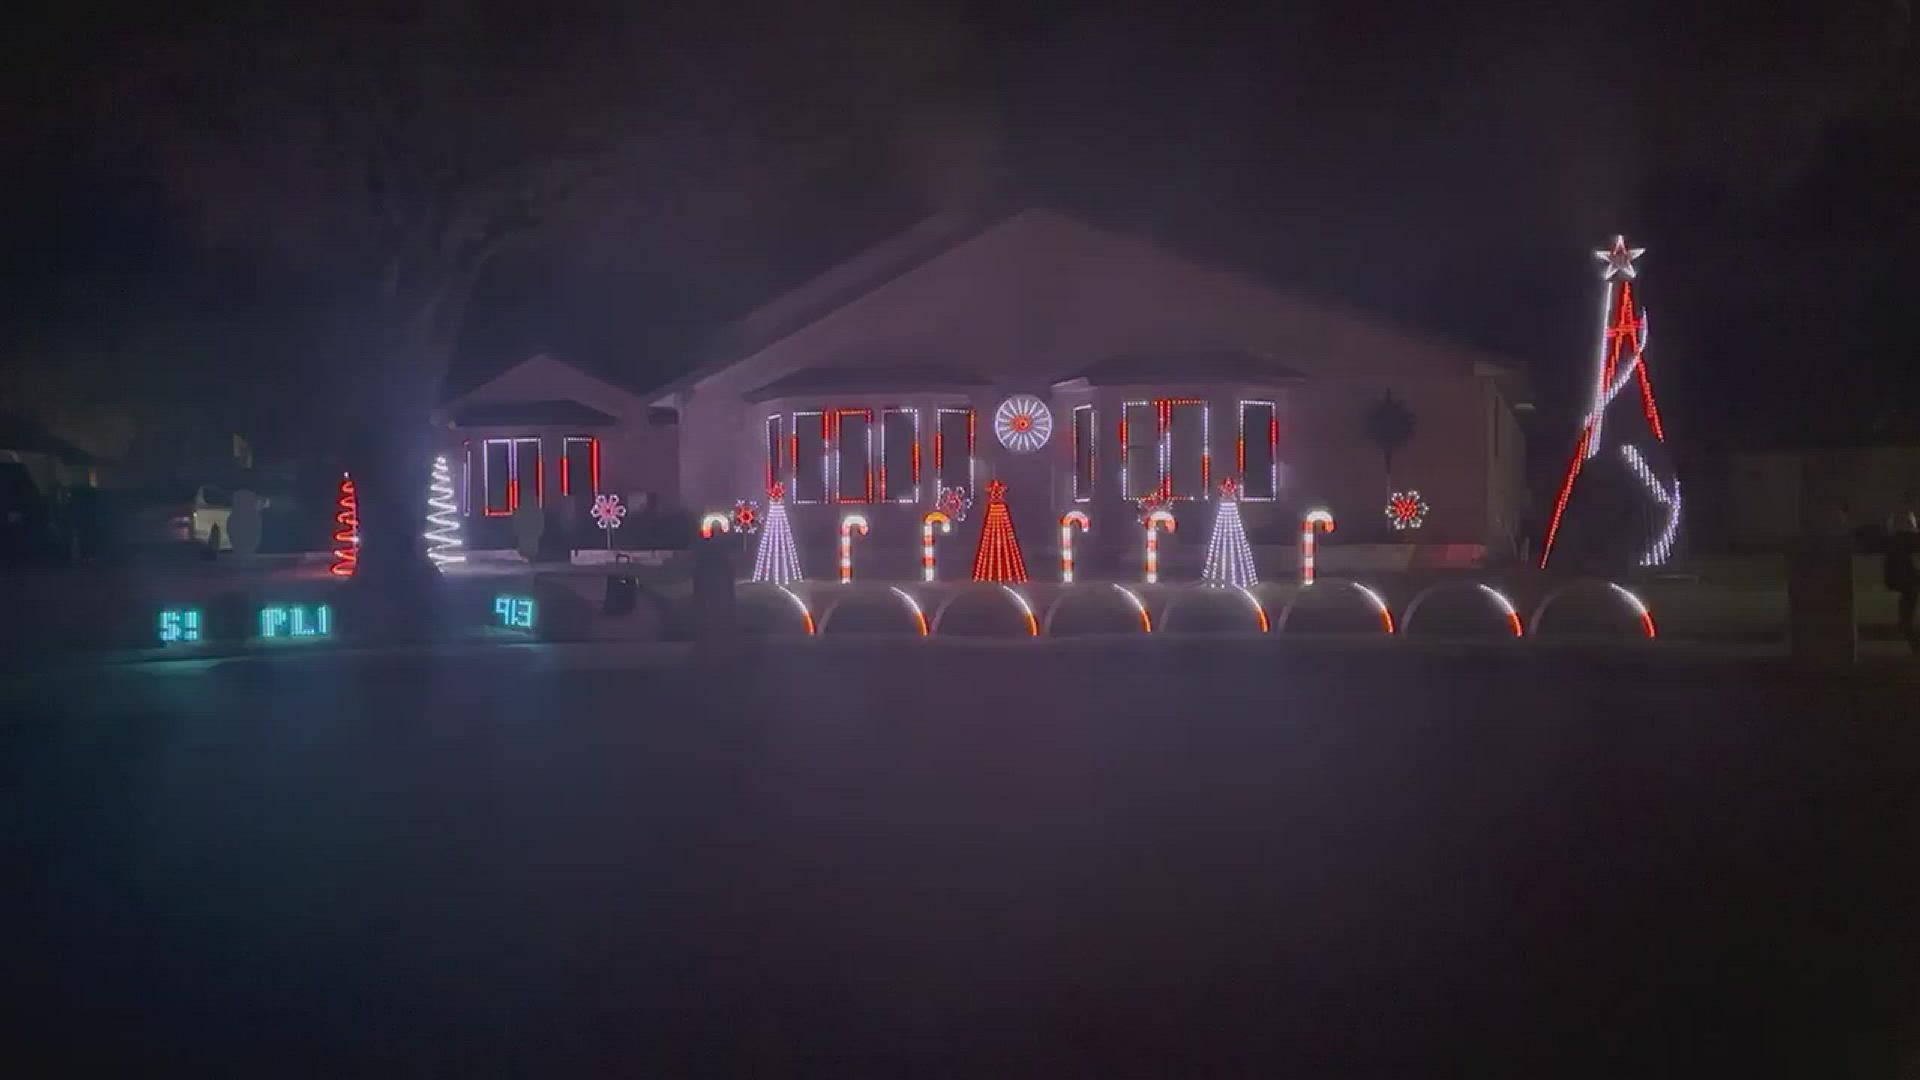 This holiday light show is set to music for the whole family to enjoy!